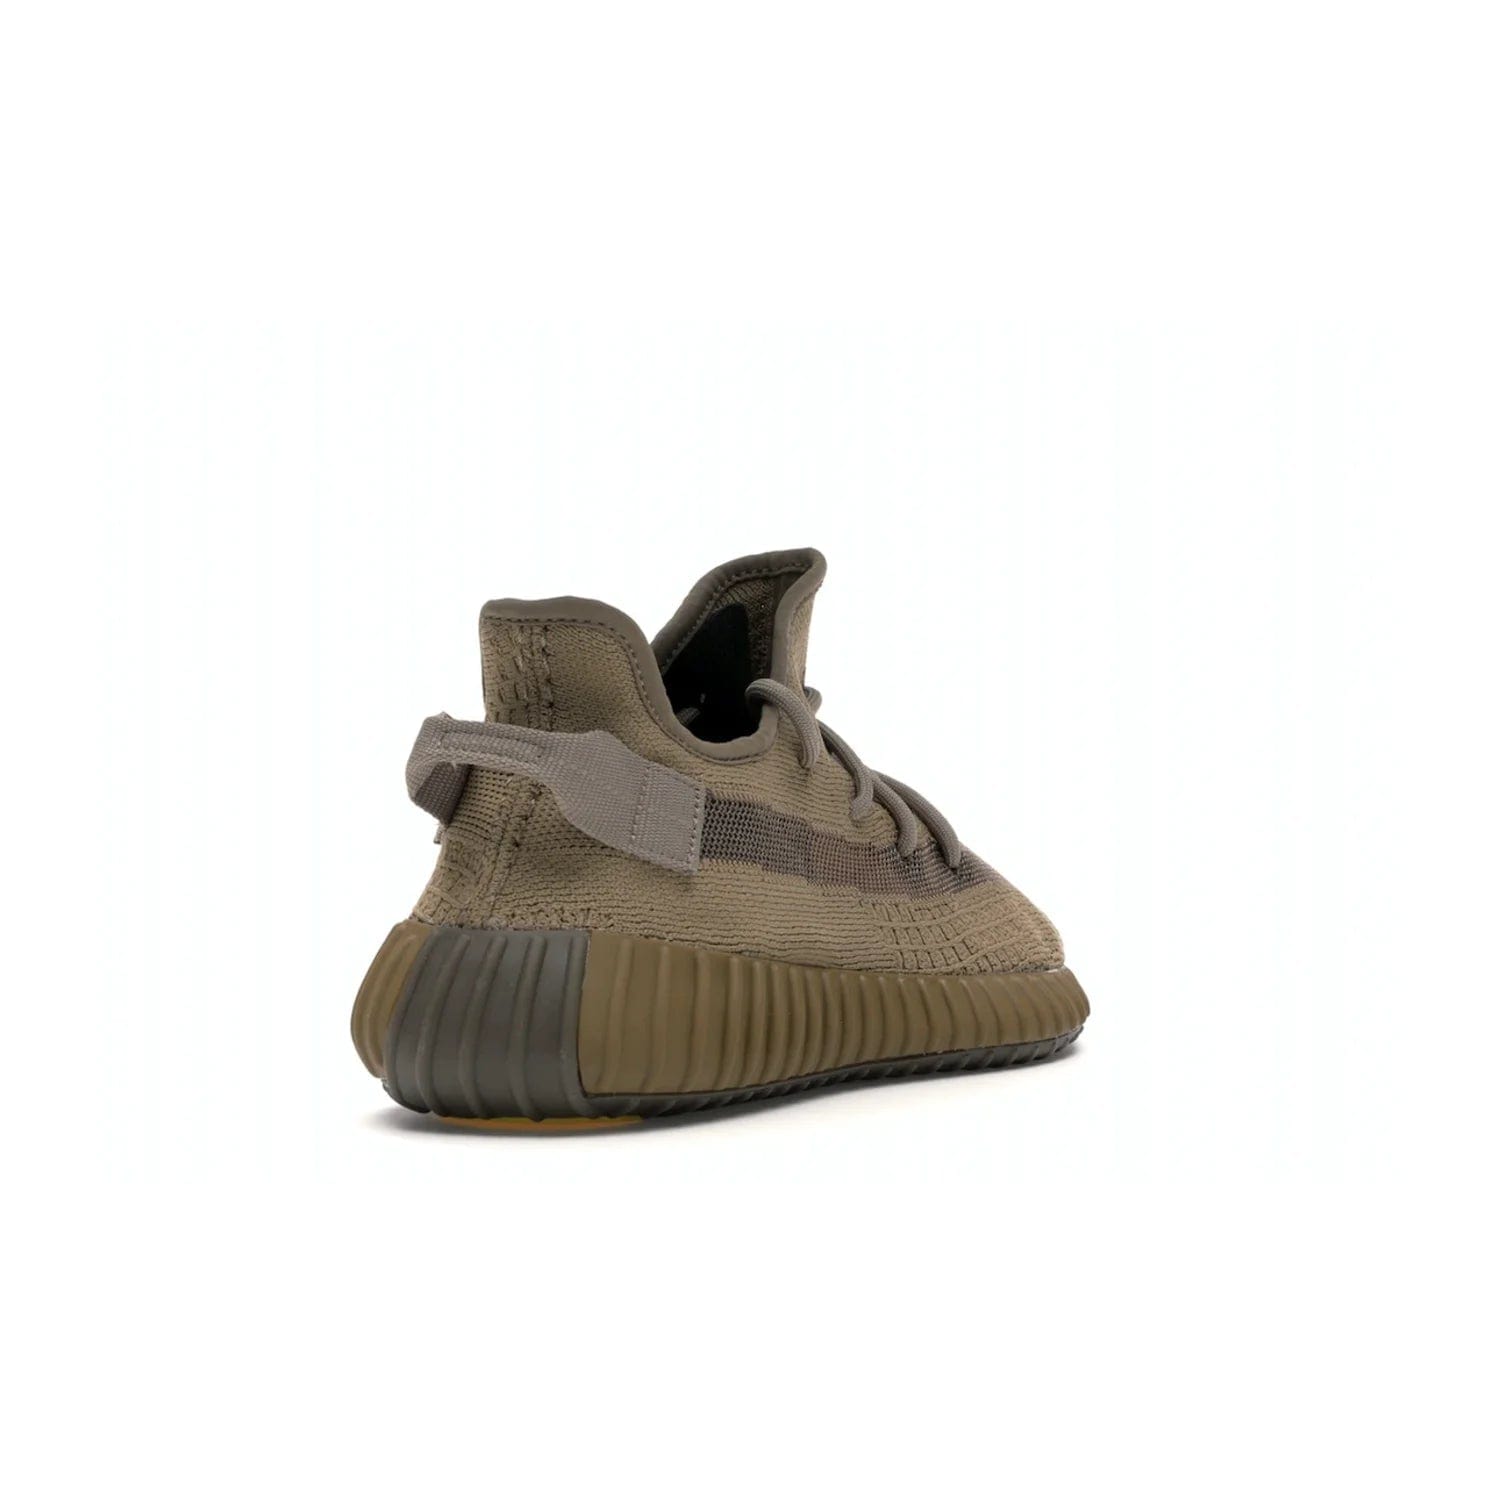 adidas Yeezy Boost 350 V2 Earth - Image 31 - Only at www.BallersClubKickz.com - Abstract style with the adidas Yeezy Boost 350 V2 Earth. Crafted with mud Primeknit upper, mud Boost and interior, and a translucent side stripe. Regional exclusive in Earth/Earth/Earth colorway, these fashionable sneakers released in February 2020. Showcase your style with the Yeezy 350 V2 Earth.